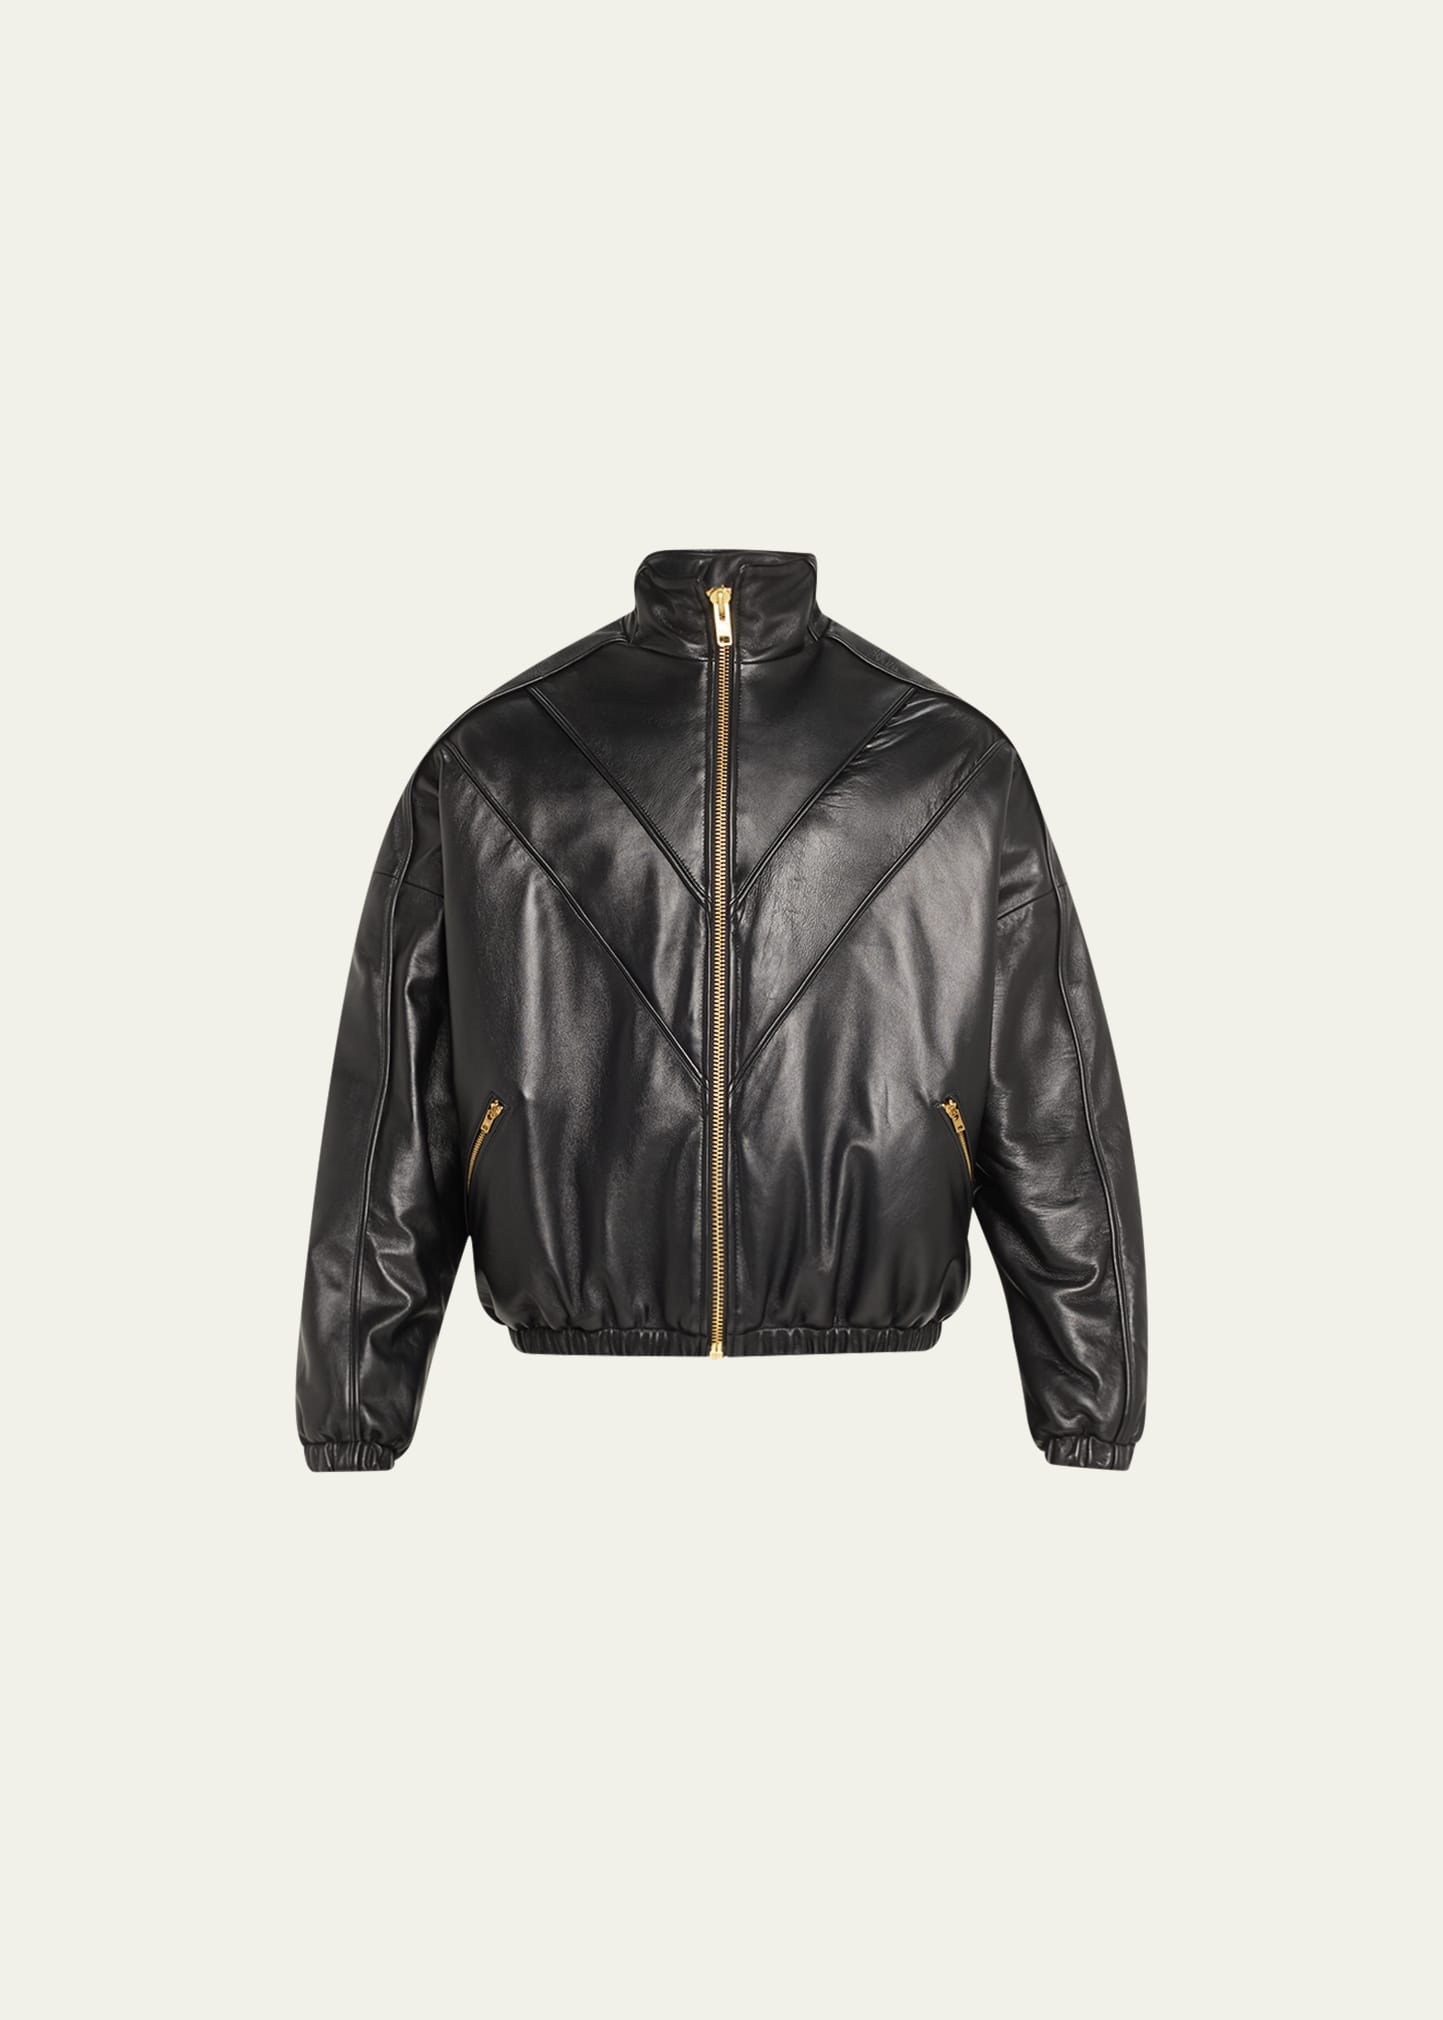 Willy Chavarria Men's Leather Track Jacket In Black